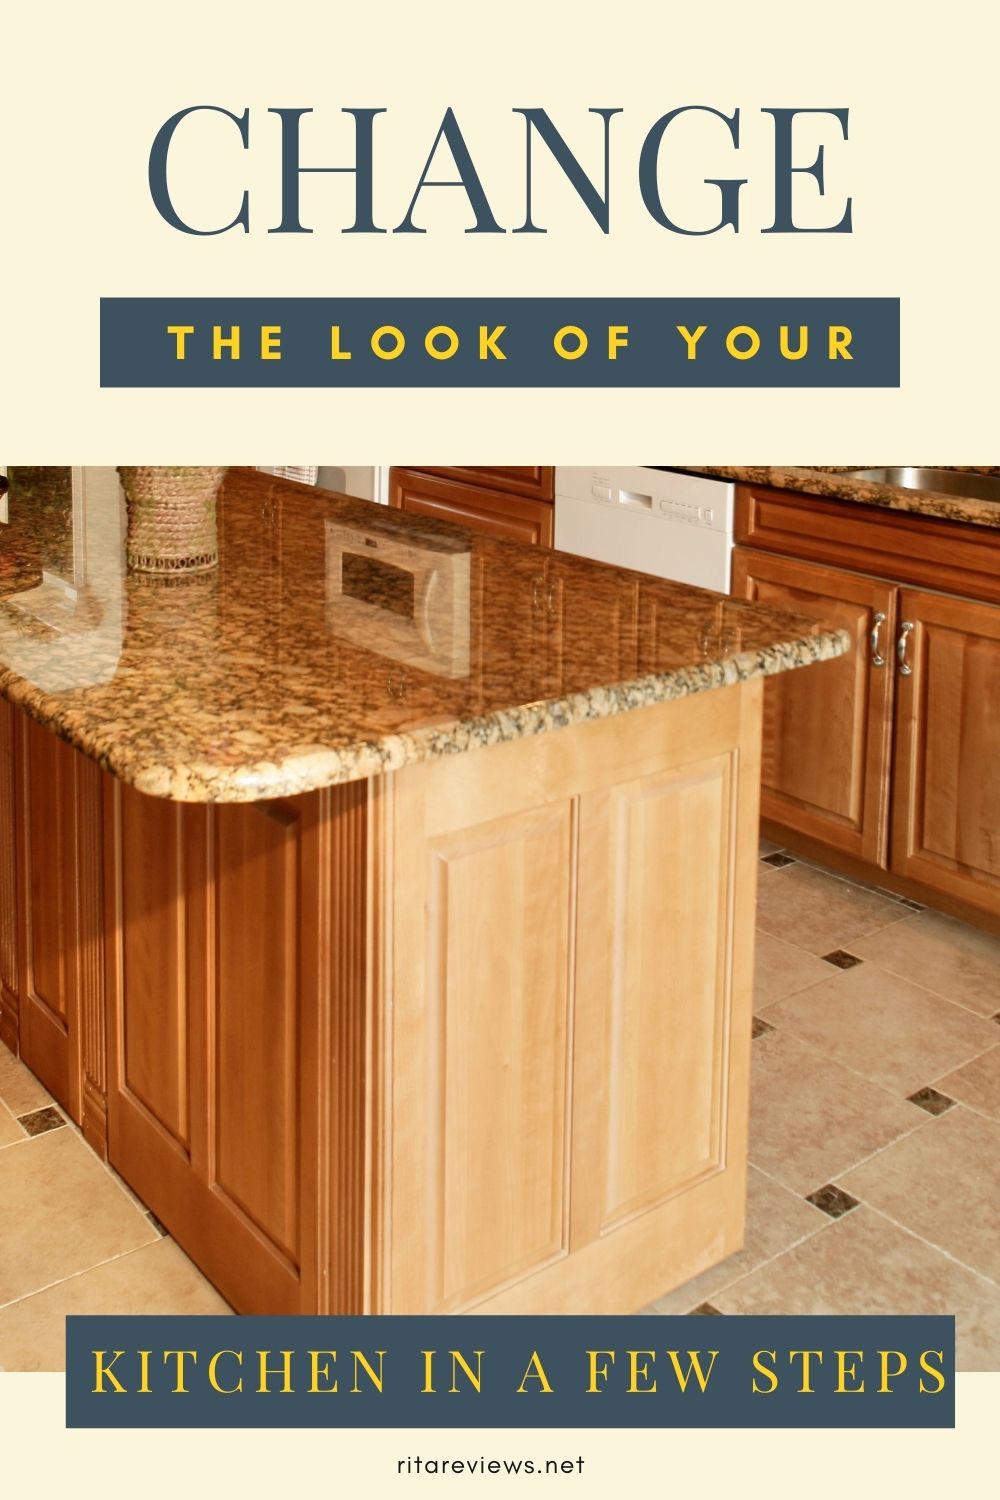 Change the Look of Your Kitchen in a Few Simple Steps